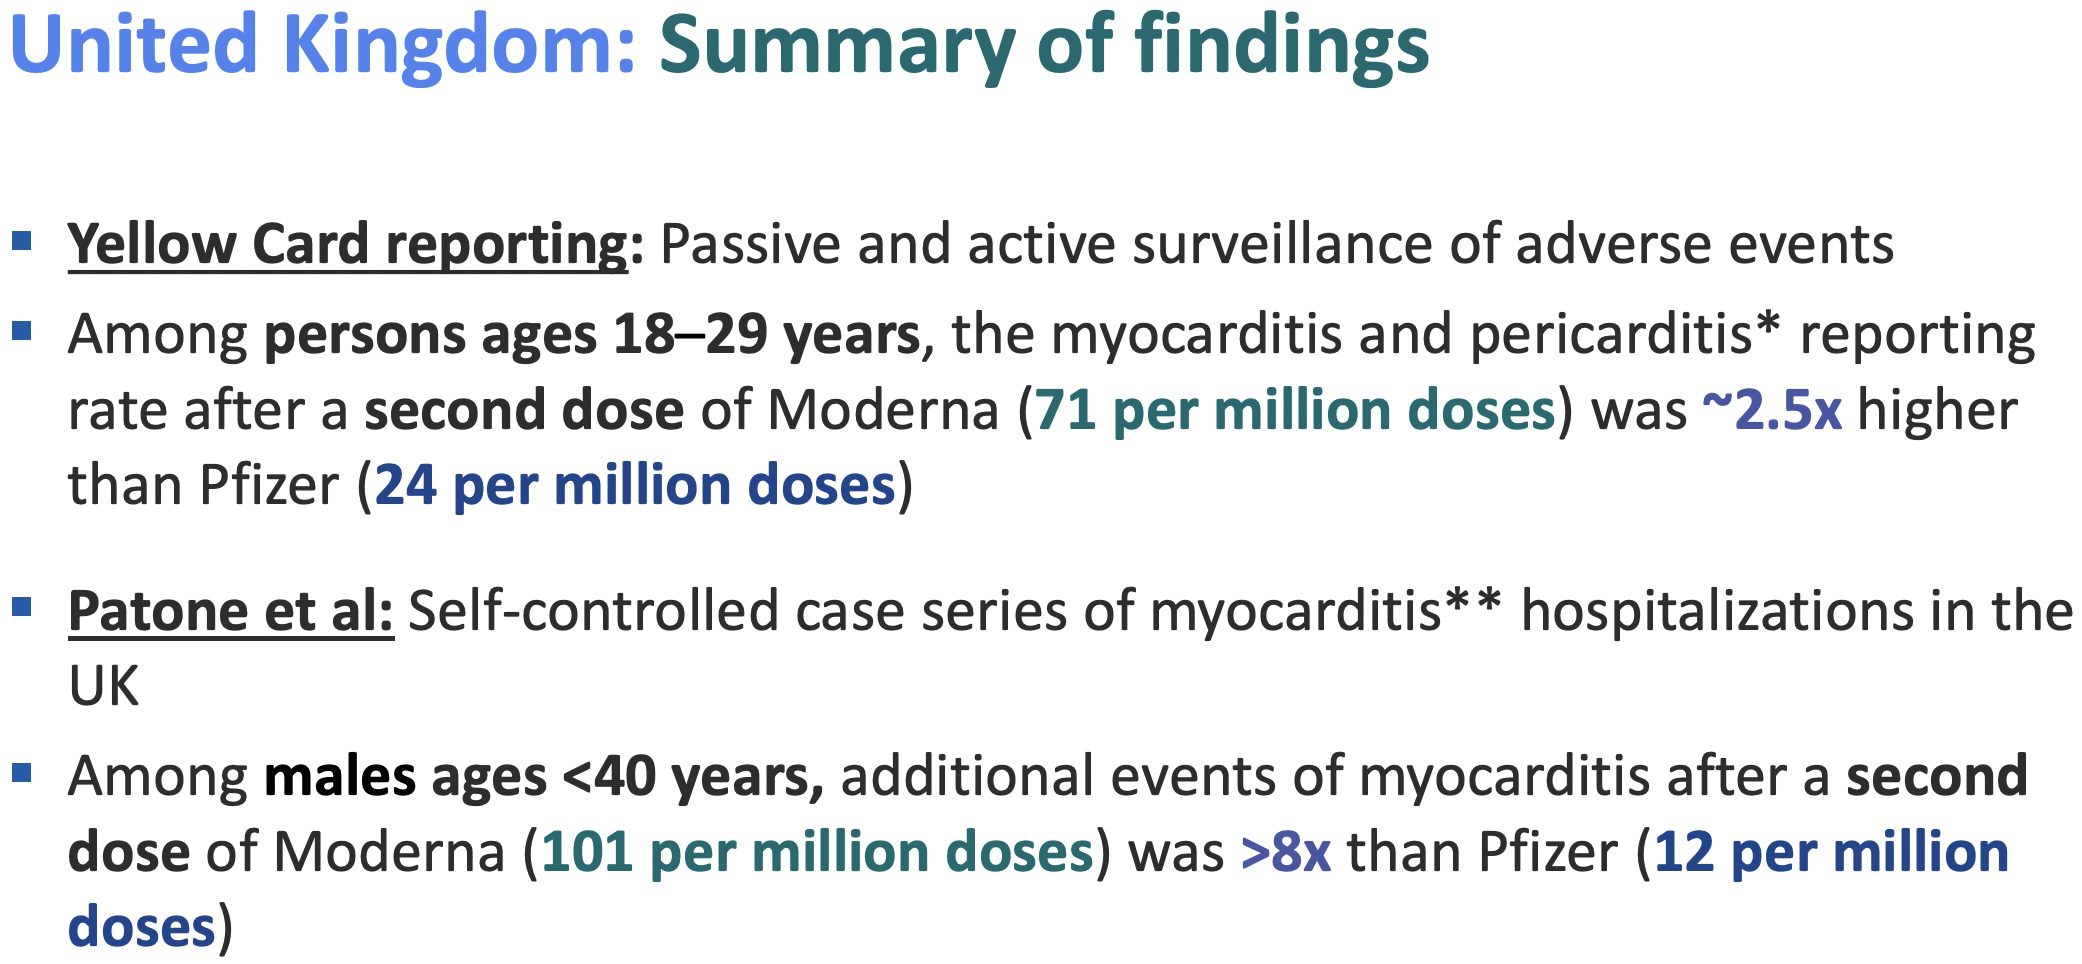  CDC Releases International Data on Risk of Myocarditis Caused by mRNA Covid-19 Vaccines Screen-Shot-2022-03-02-at-3.16.10-AM